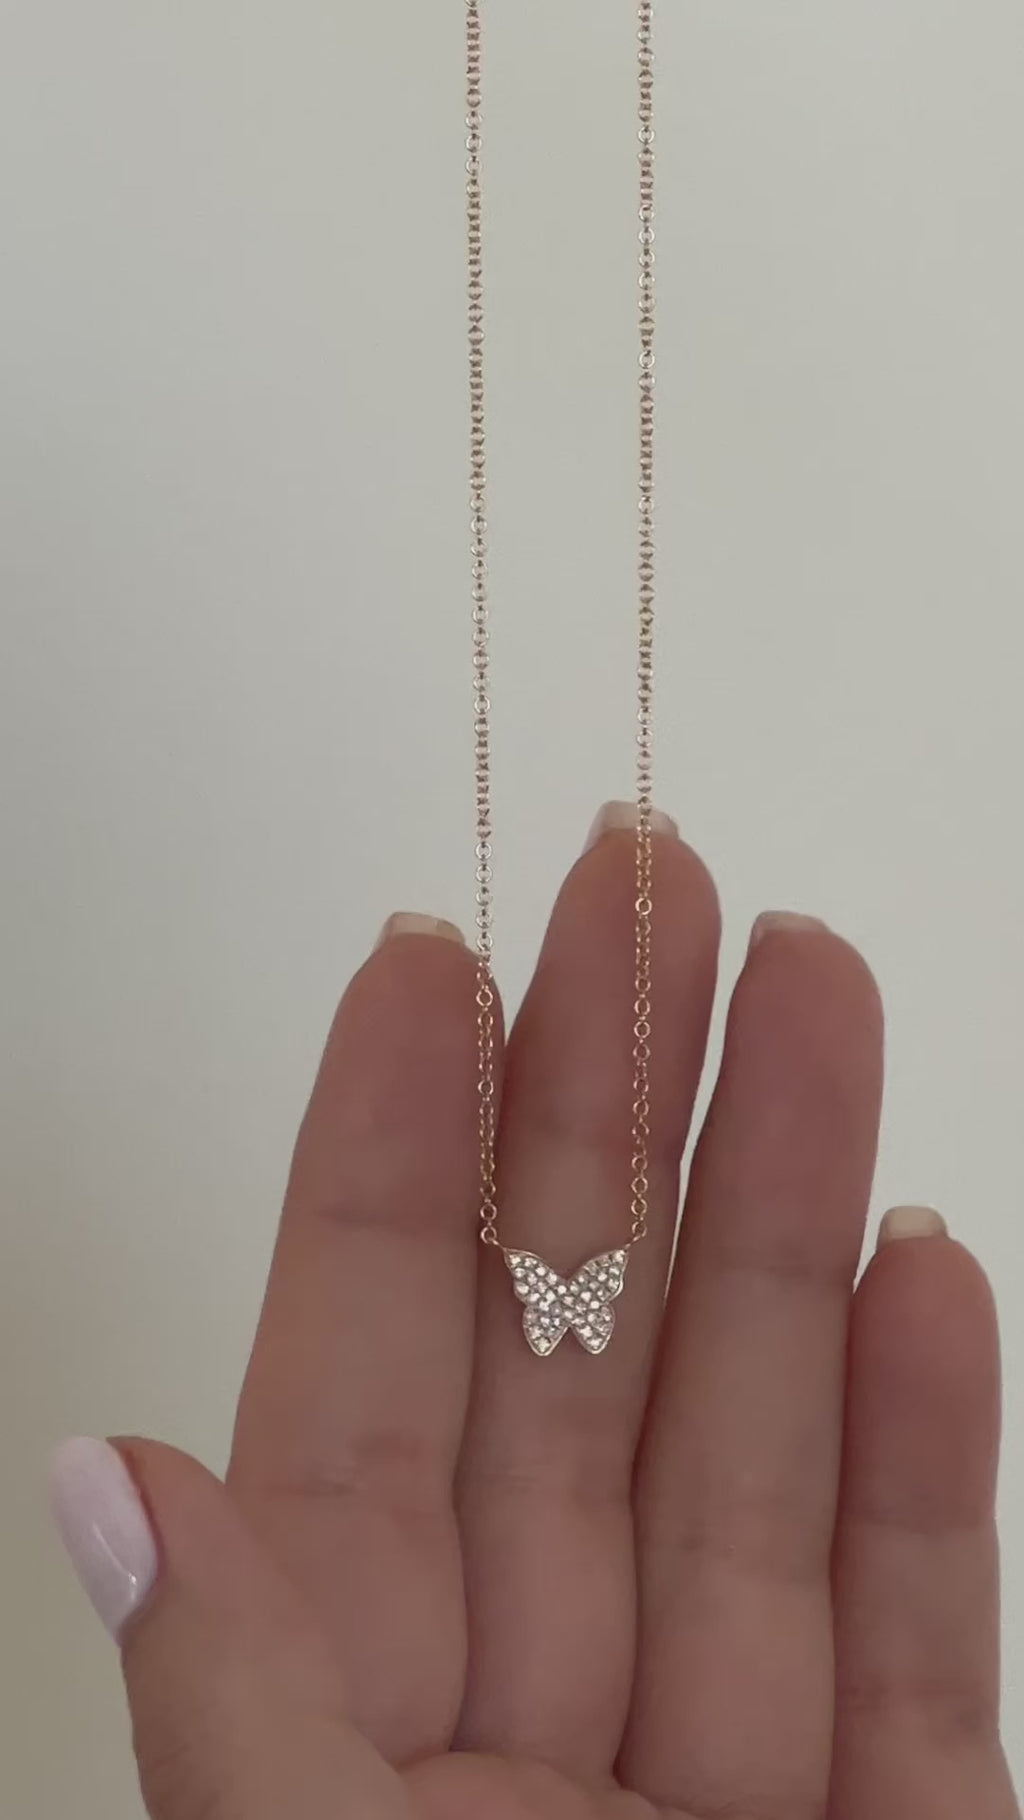 Diamond Butterfly Necklace in 14k yellow gold held in hand and then styled on neck of model wearing white blouse with no audio